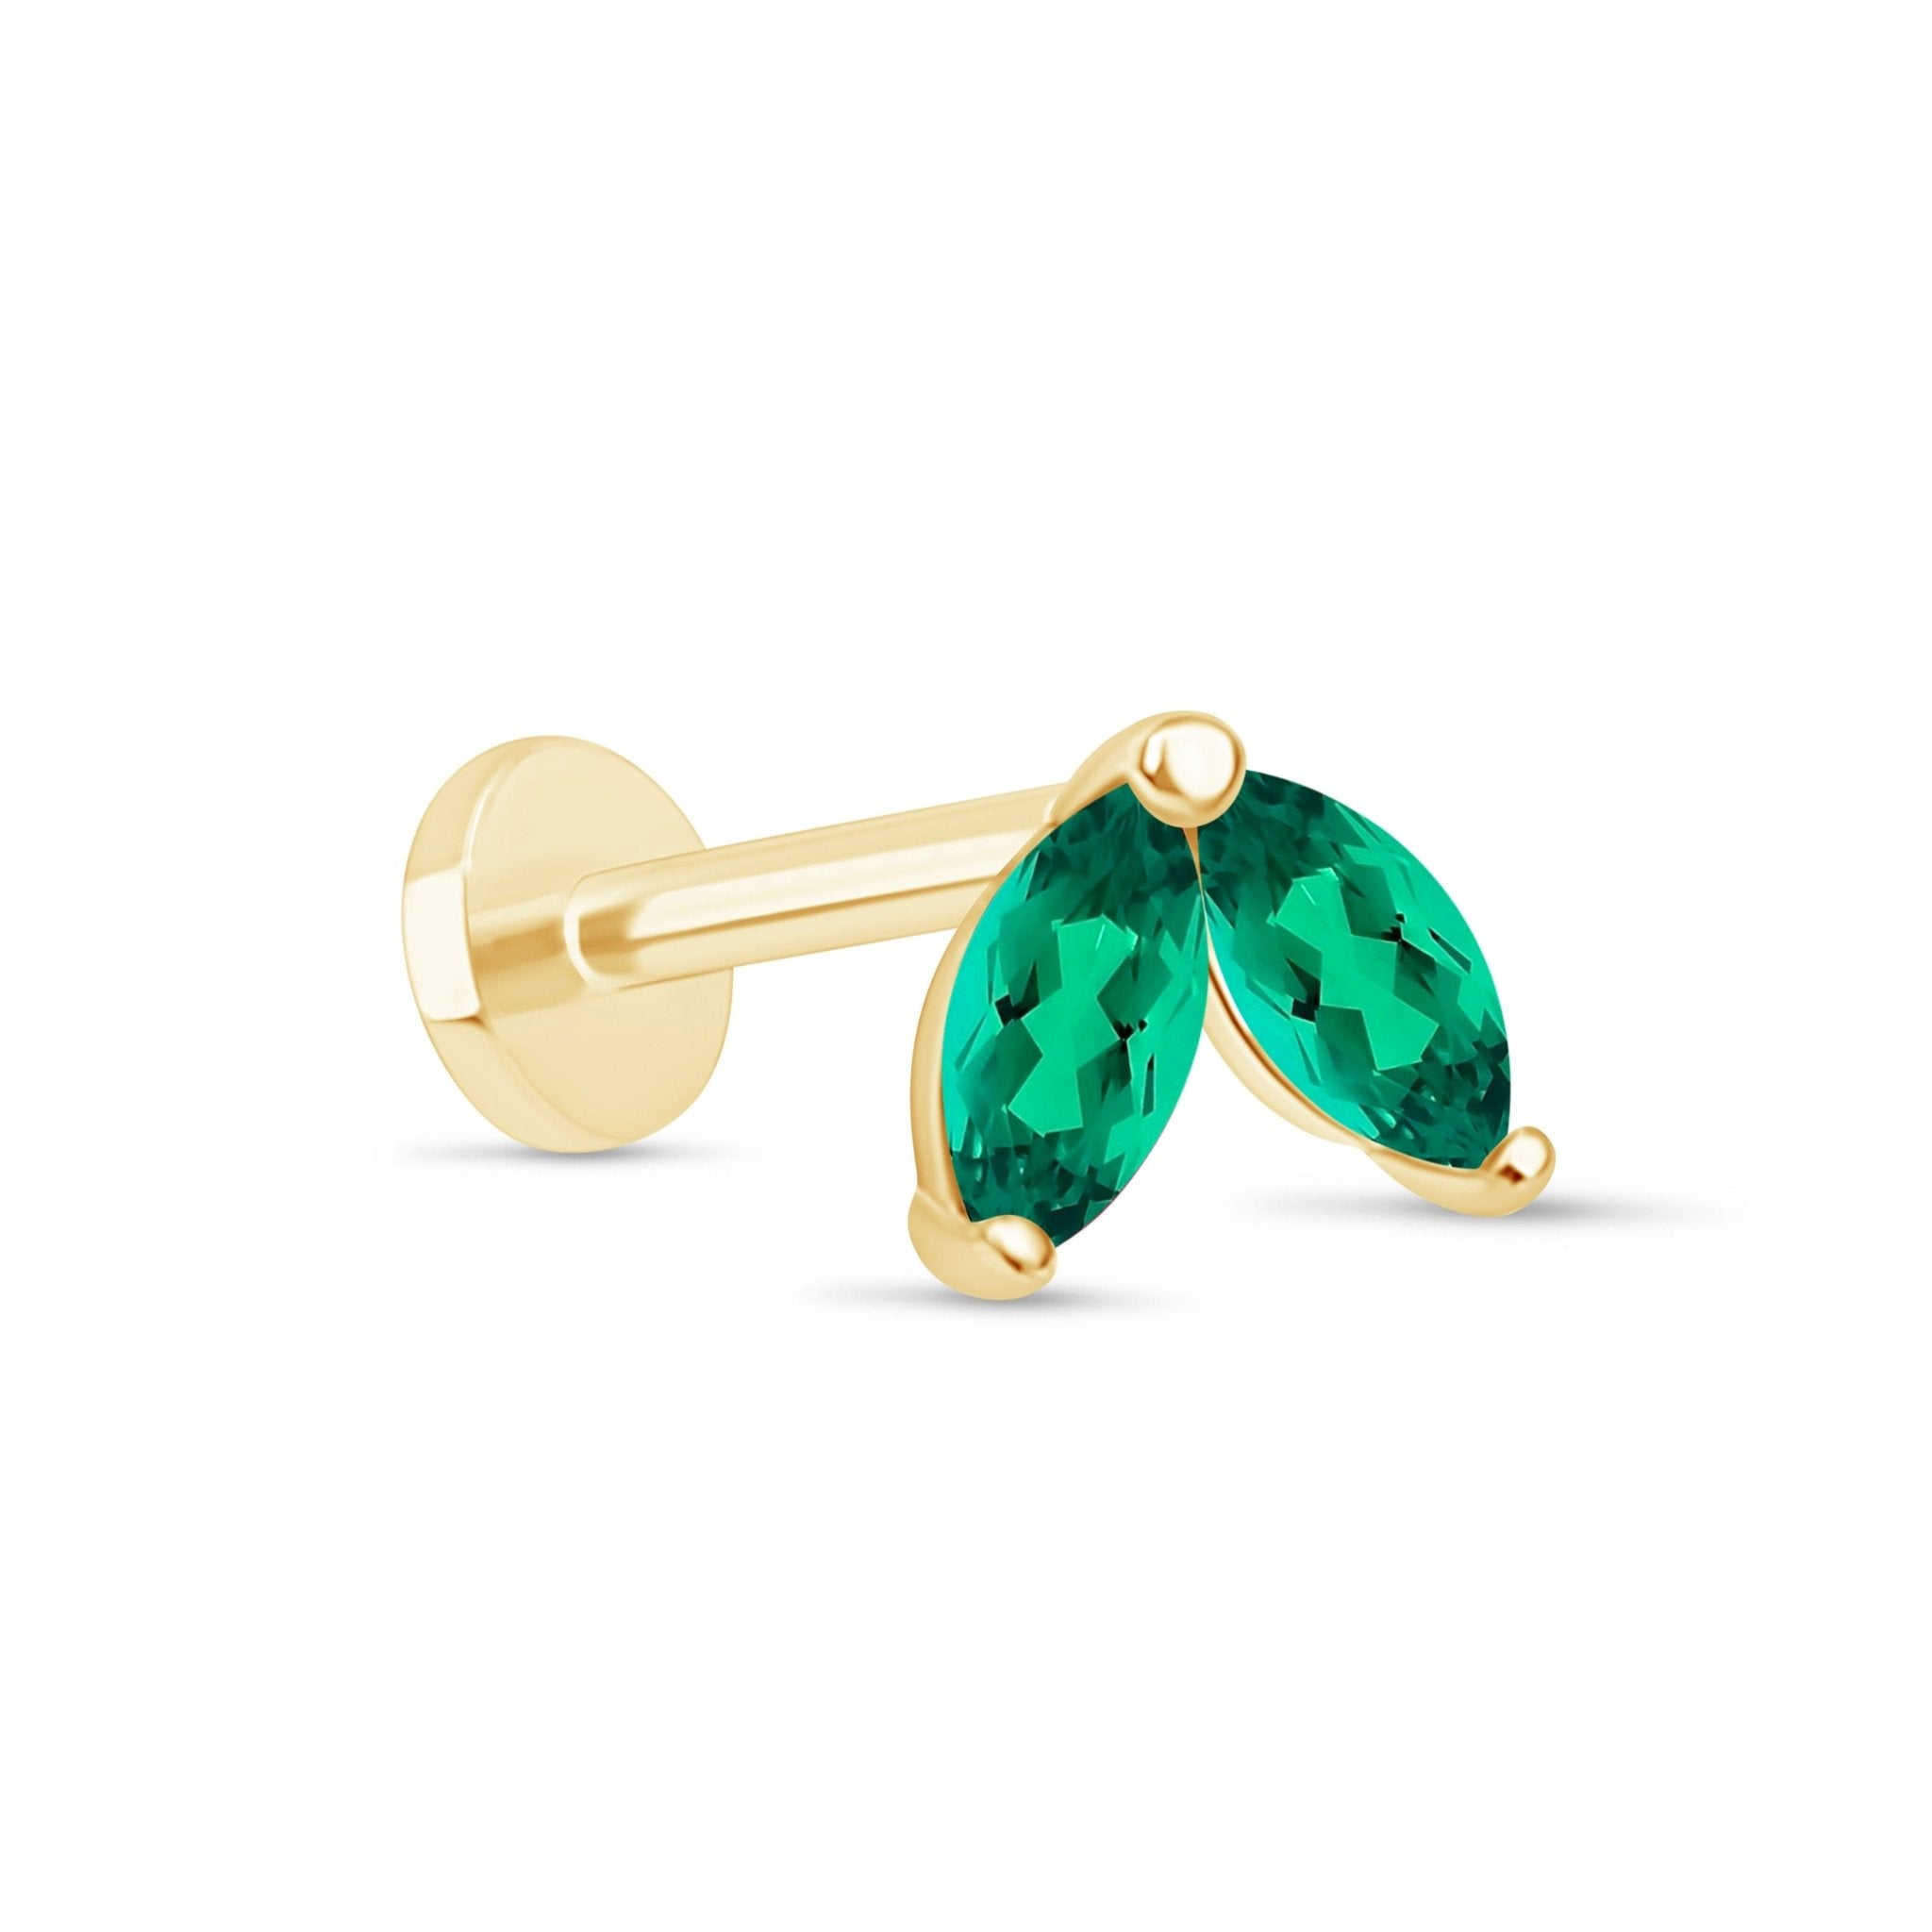 Emerald Double Marquise Earrings Earrings Estella Collection #product_description# 18573 test test mechanic #tag4# #tag5# #tag6# #tag7# #tag8# #tag9# #tag10#